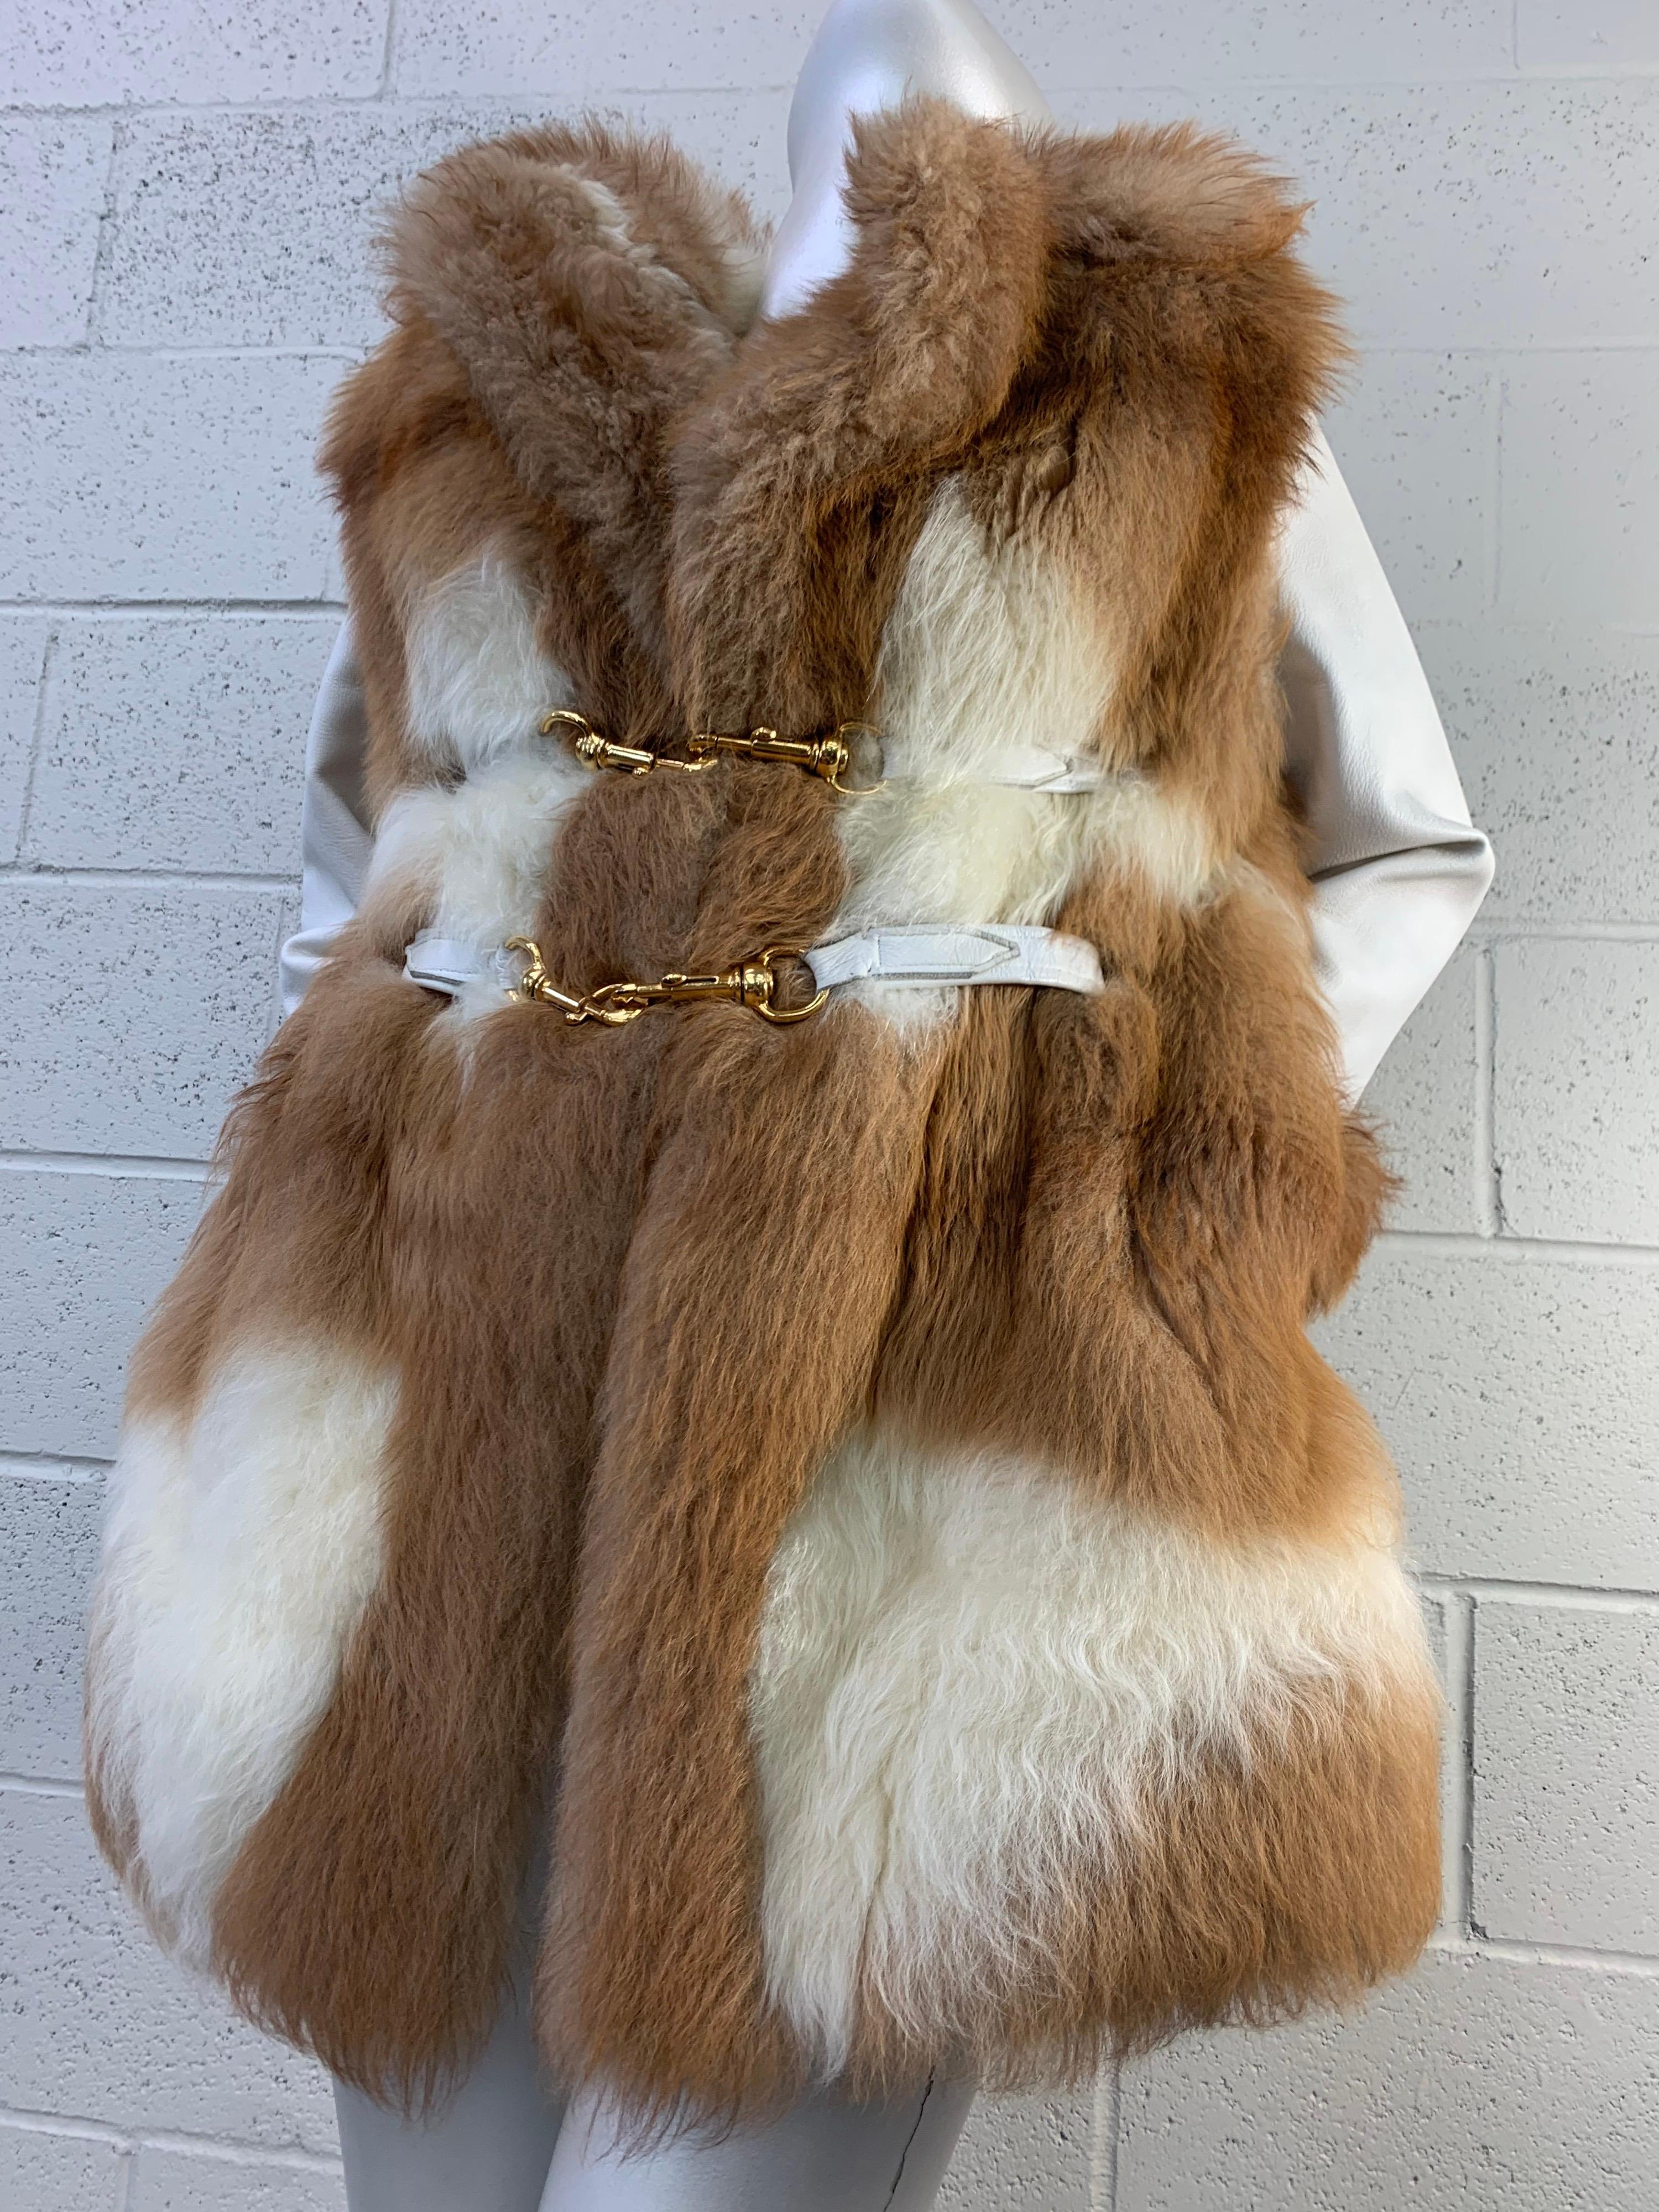 1960s Super-rare Mod-styled natural vicuna fur coat jacket with white leather sleeves. Collar and sleeves are trimmed in vicuna also. Vicuna is one of the costliest fibers in the world and is incredibly soft. You won't see this stunning arrangement